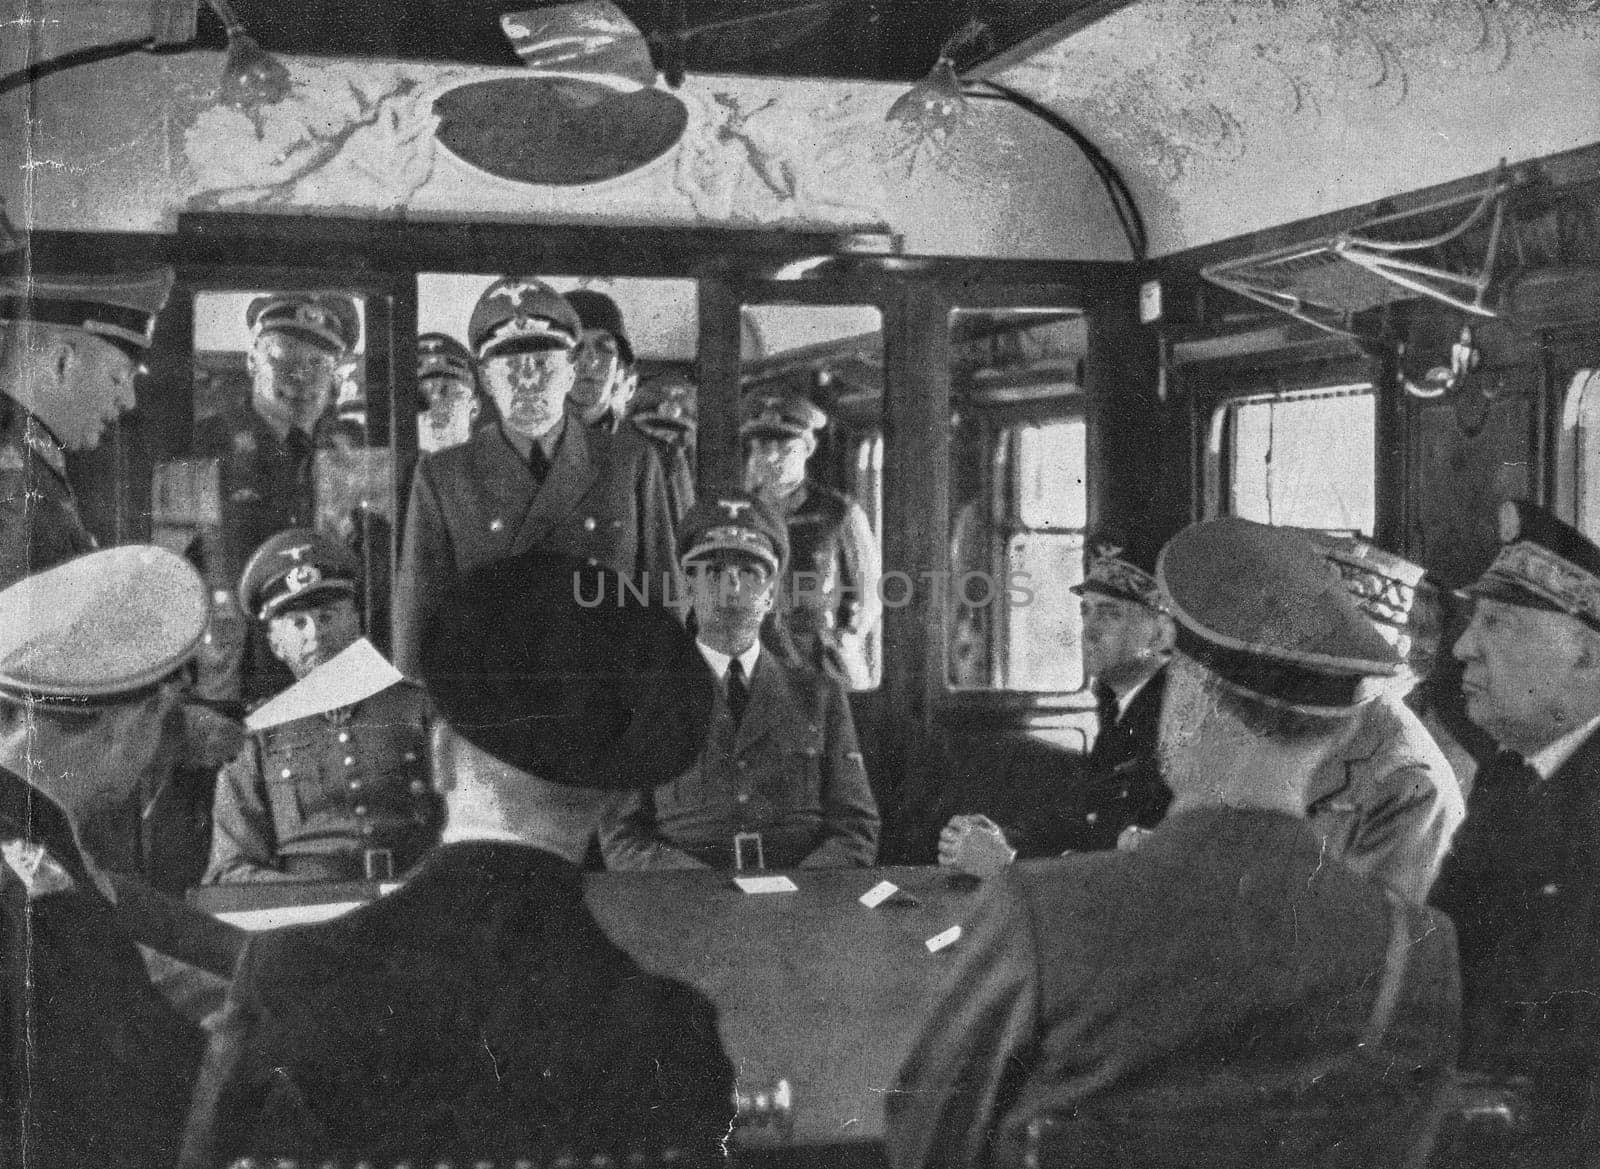 Armistice with France-Second Compiegne was signed between Nazi Germany and the defeated France in Le Francport, near Compi gne, in the same place as in 1918, in the same railroad carriage, but with the seats swapped. by roman_nerud